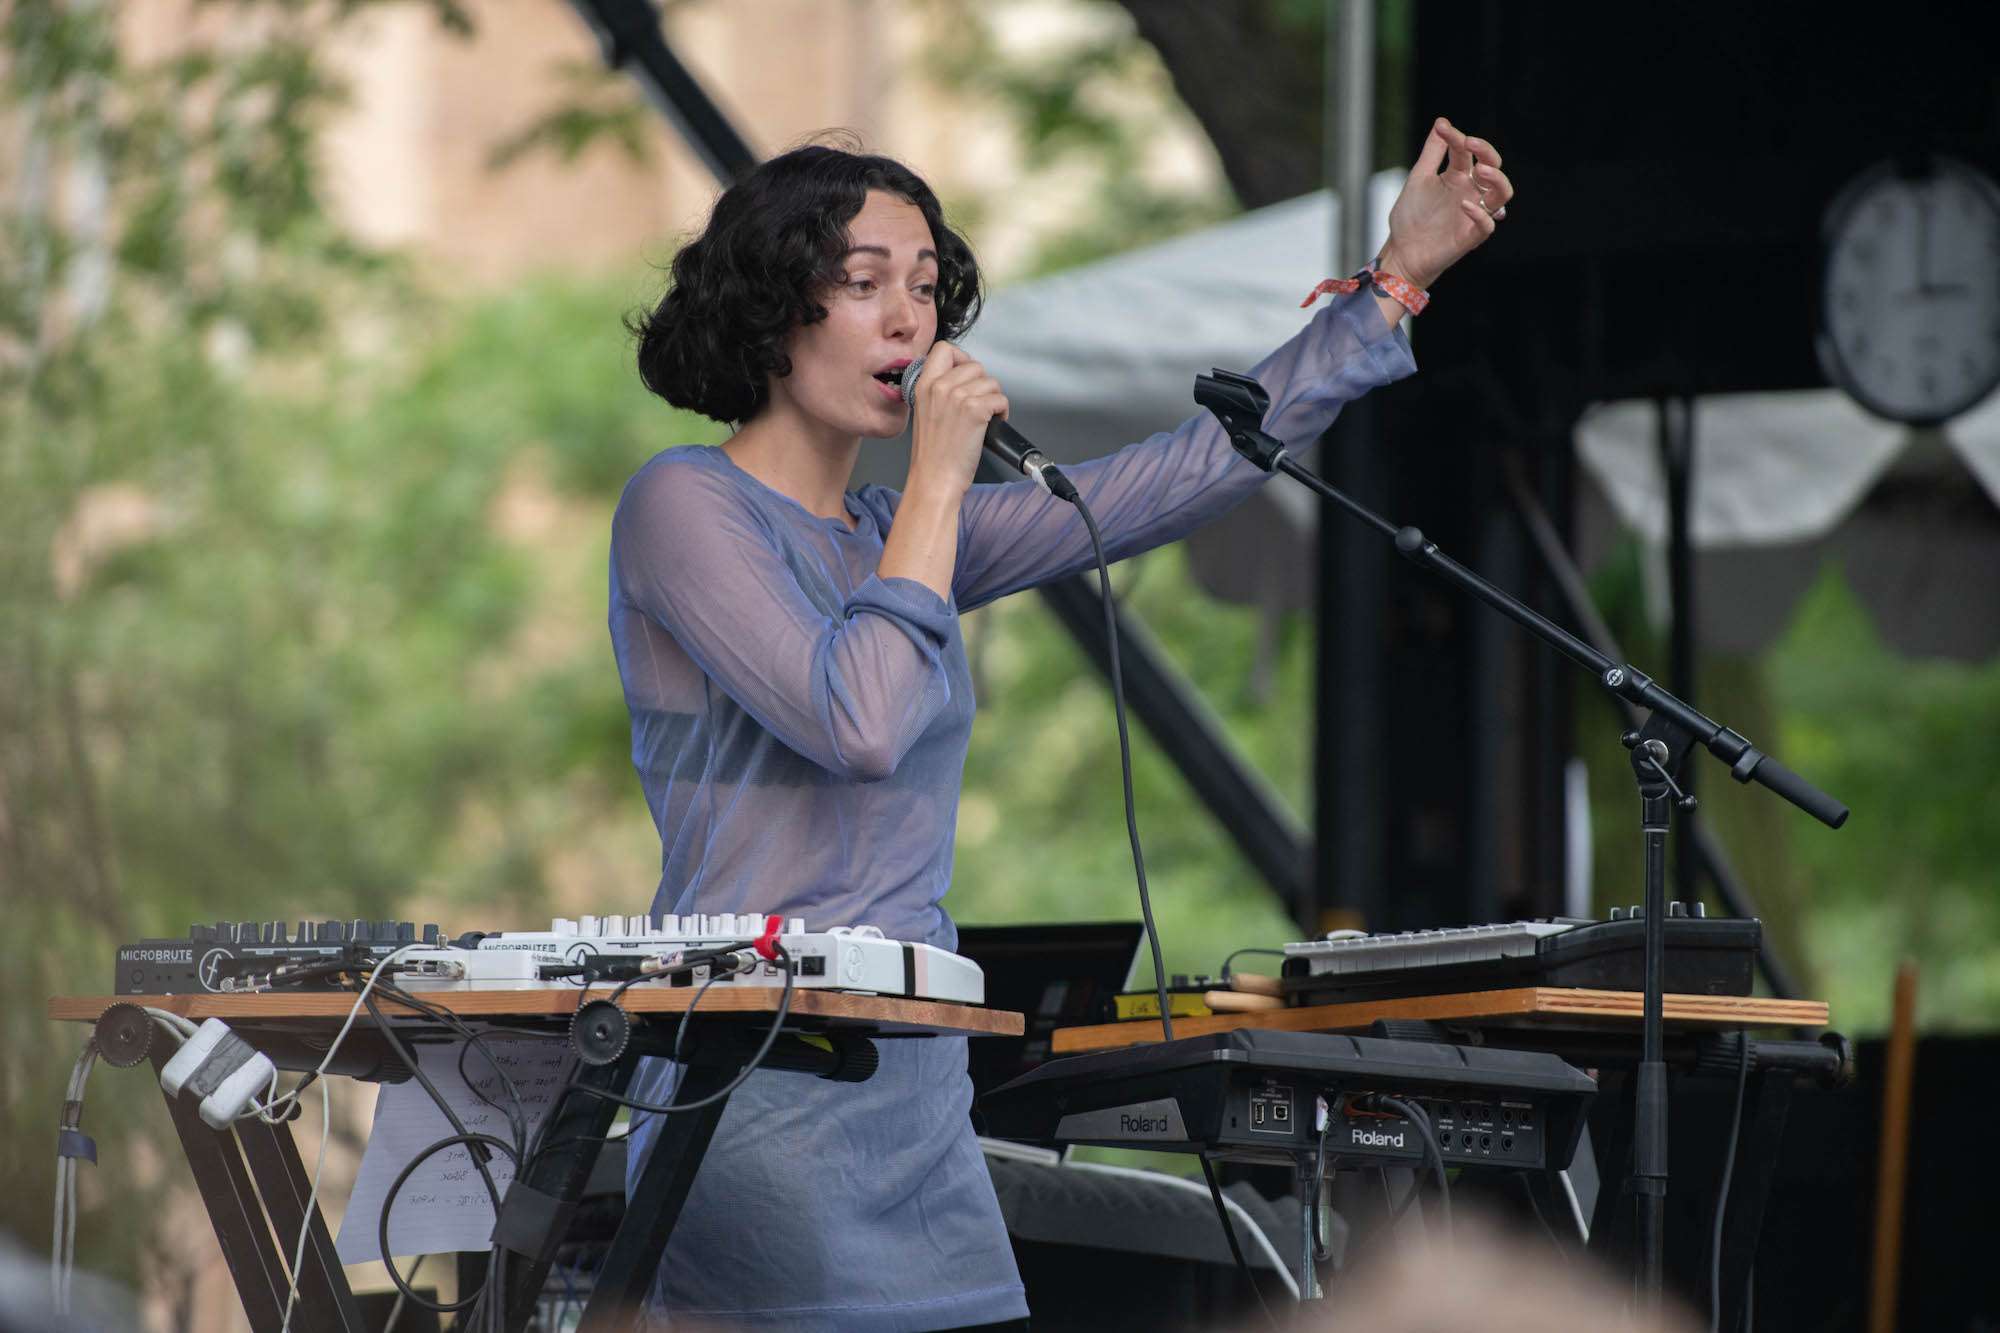 Kelly Lee Owens Live at Pitchfork Music Fest [GALLERY] 11